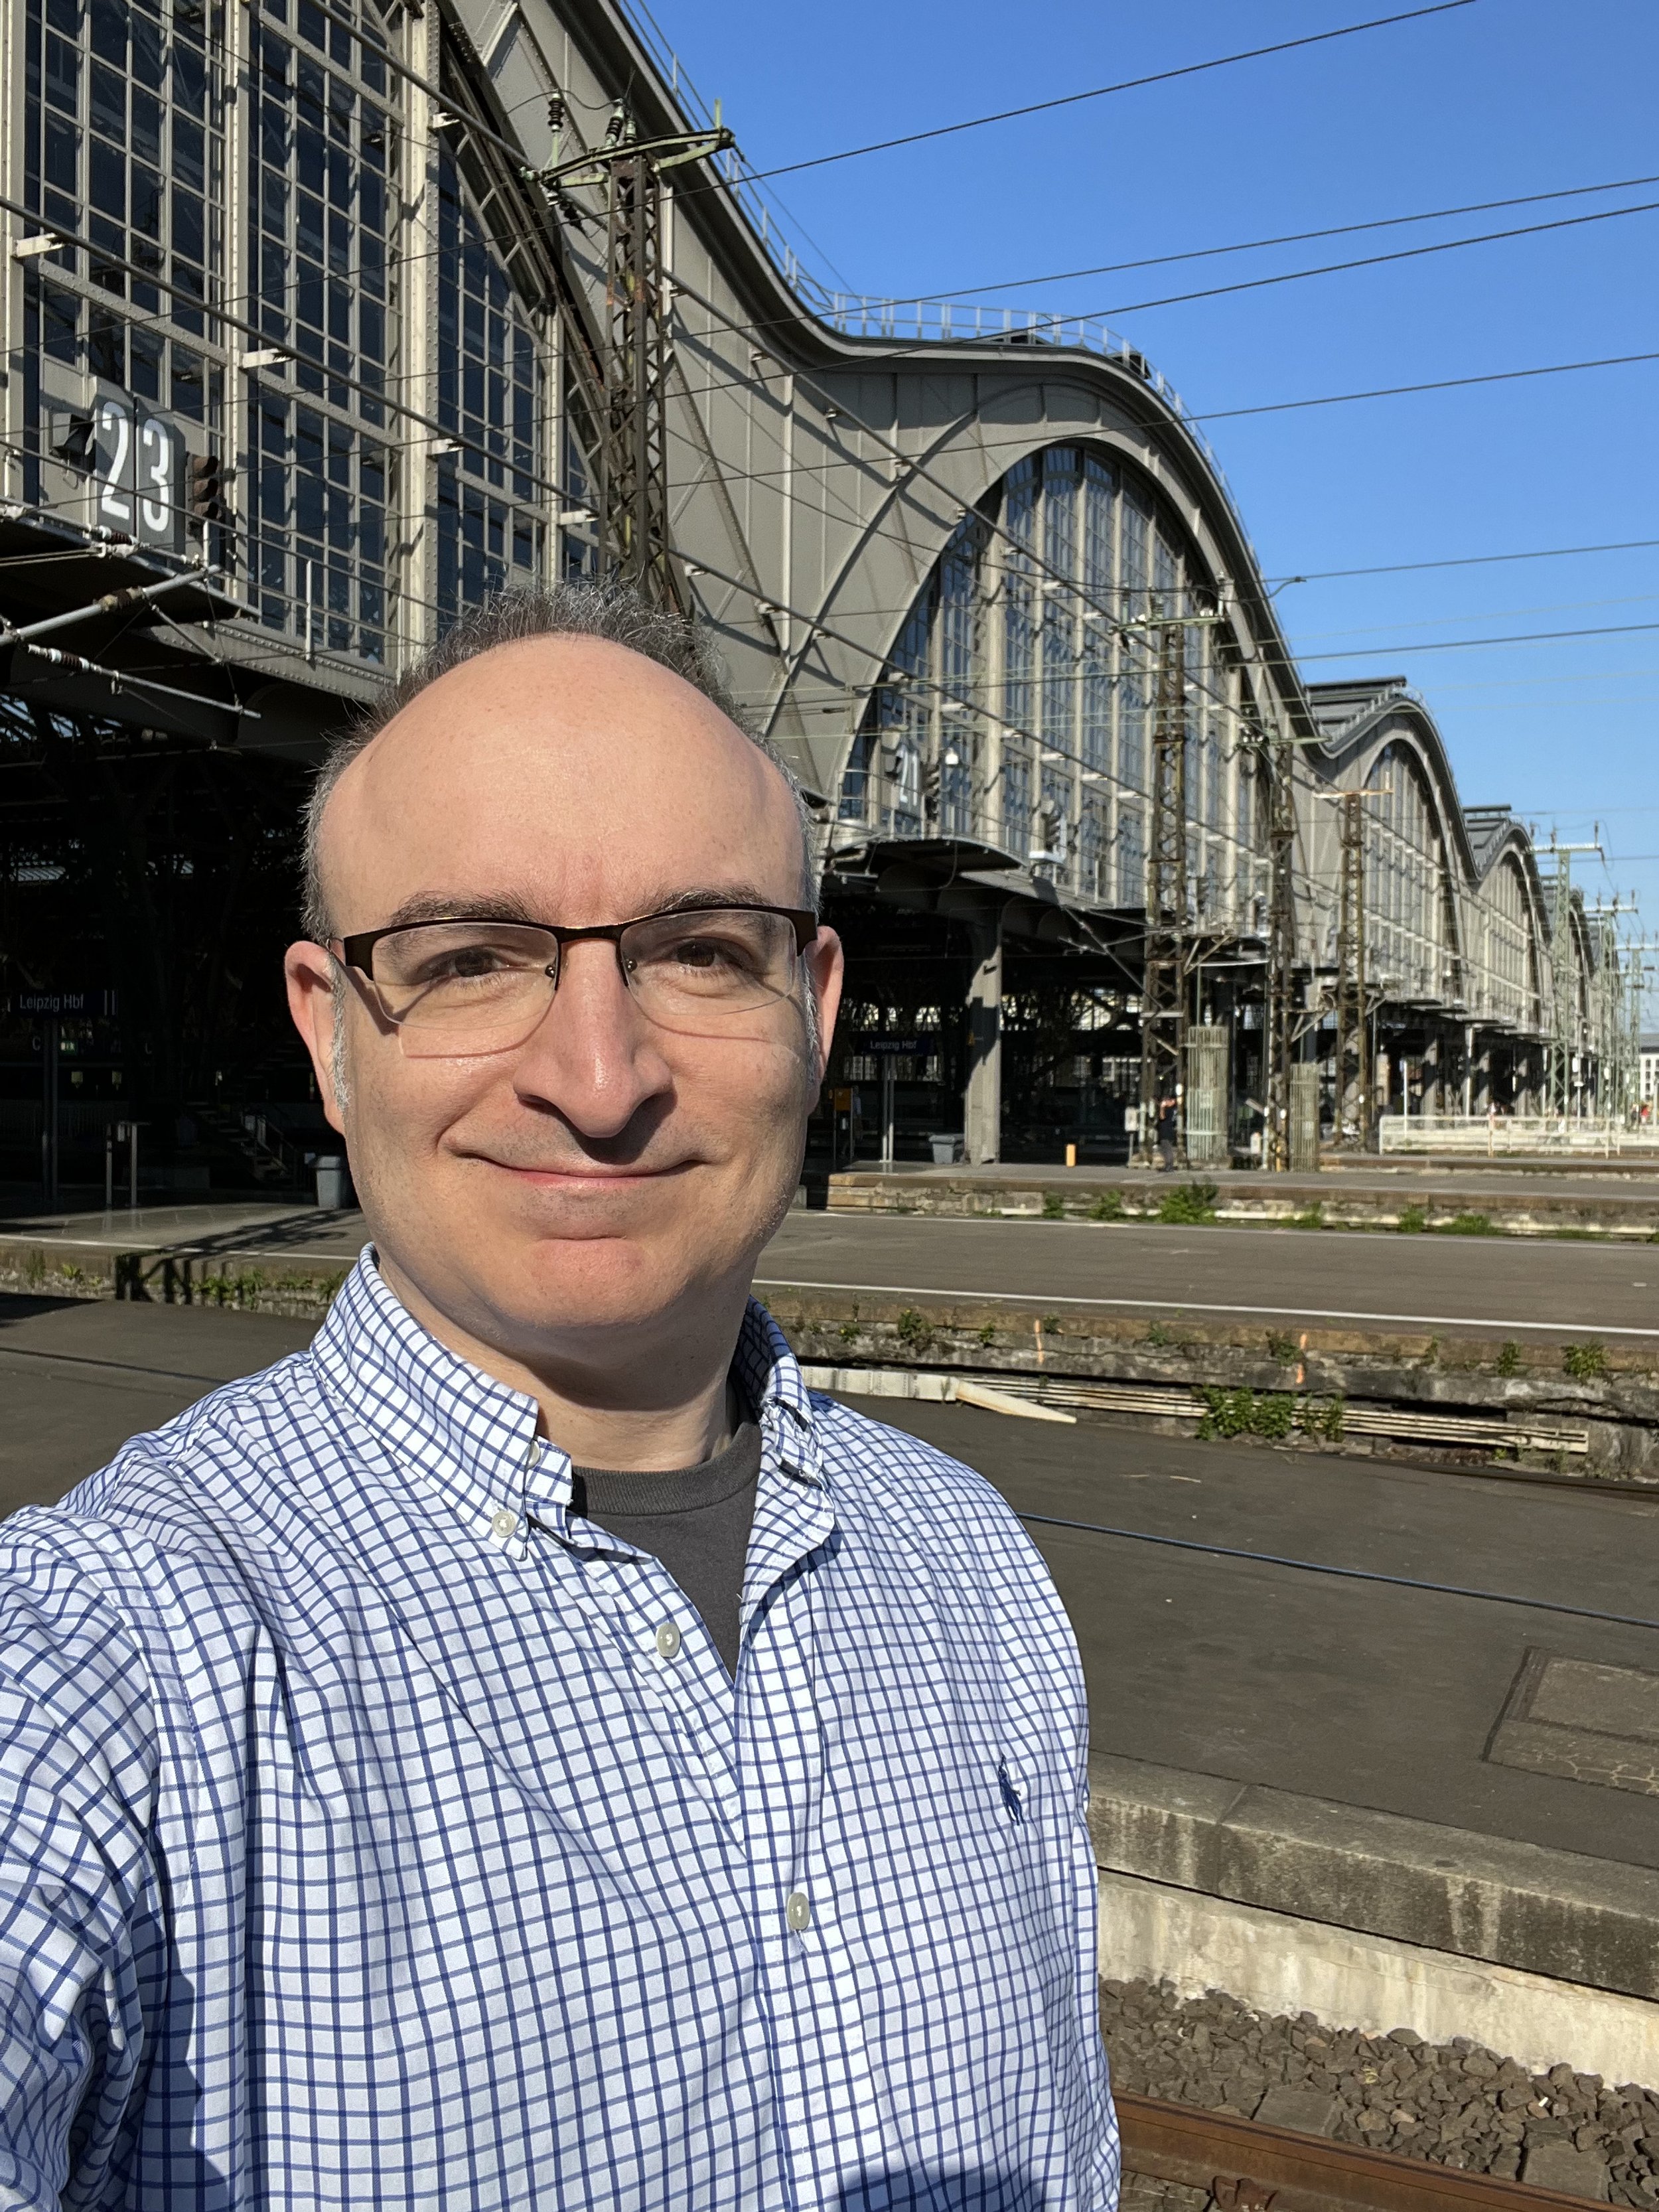 Yours truly taking a selfie from platform 24 of Leipzig Bahnhof.